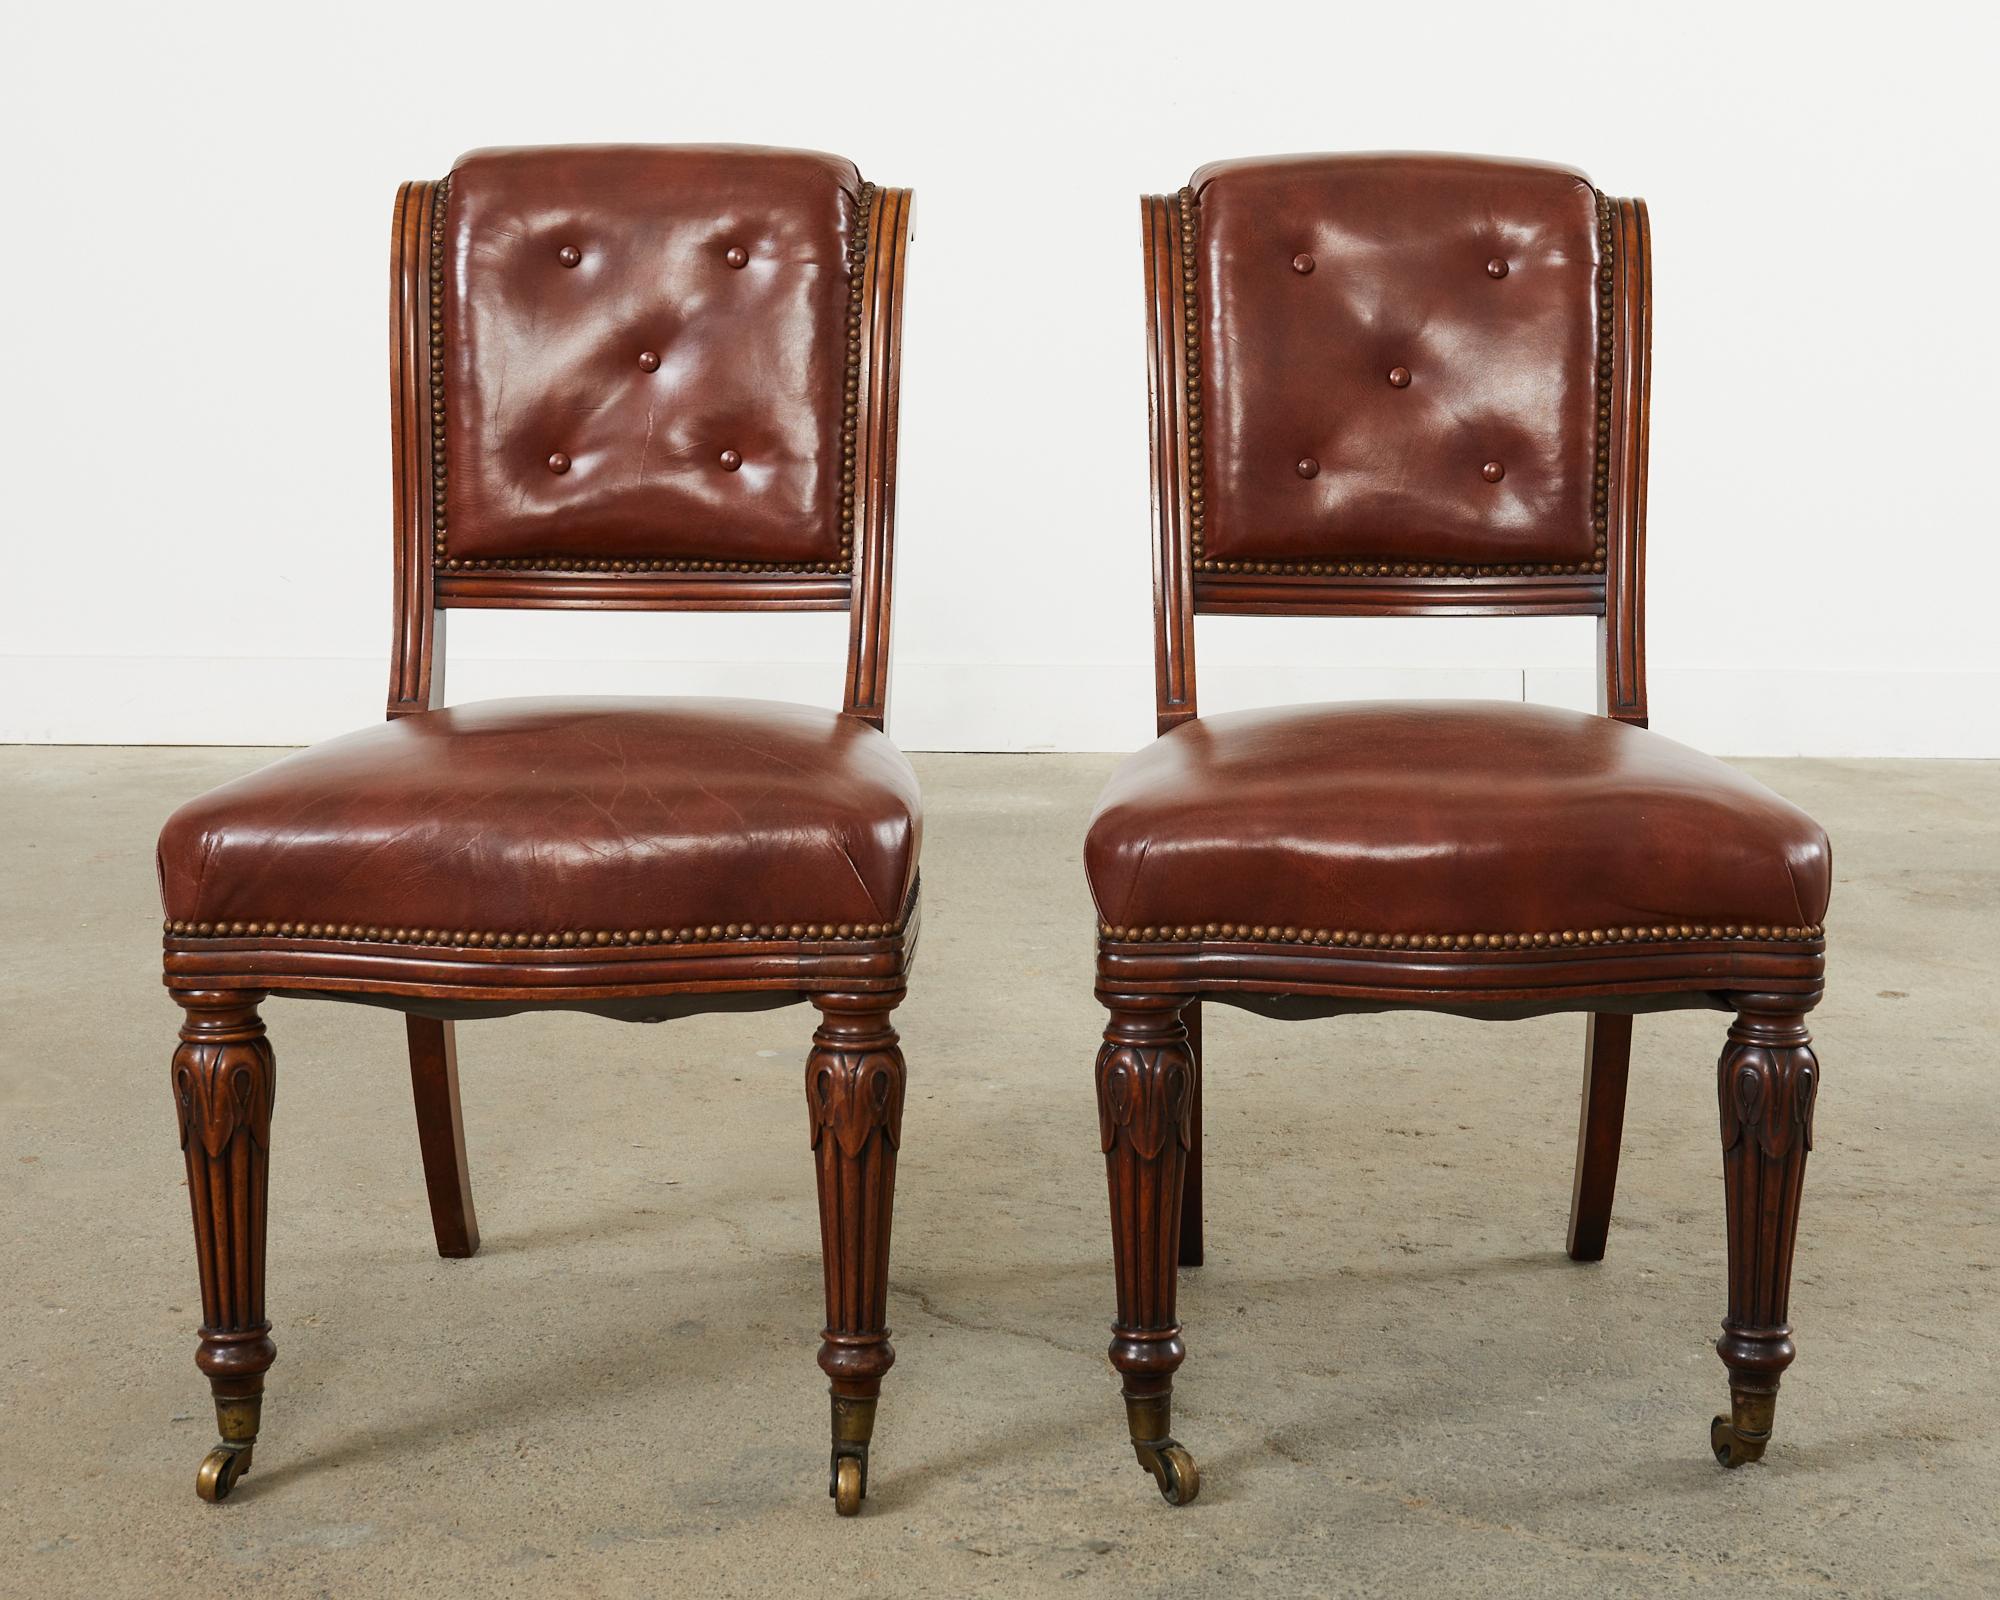 20th Century Set of Six English Regency Style Mahogany Leather Dining Chairs